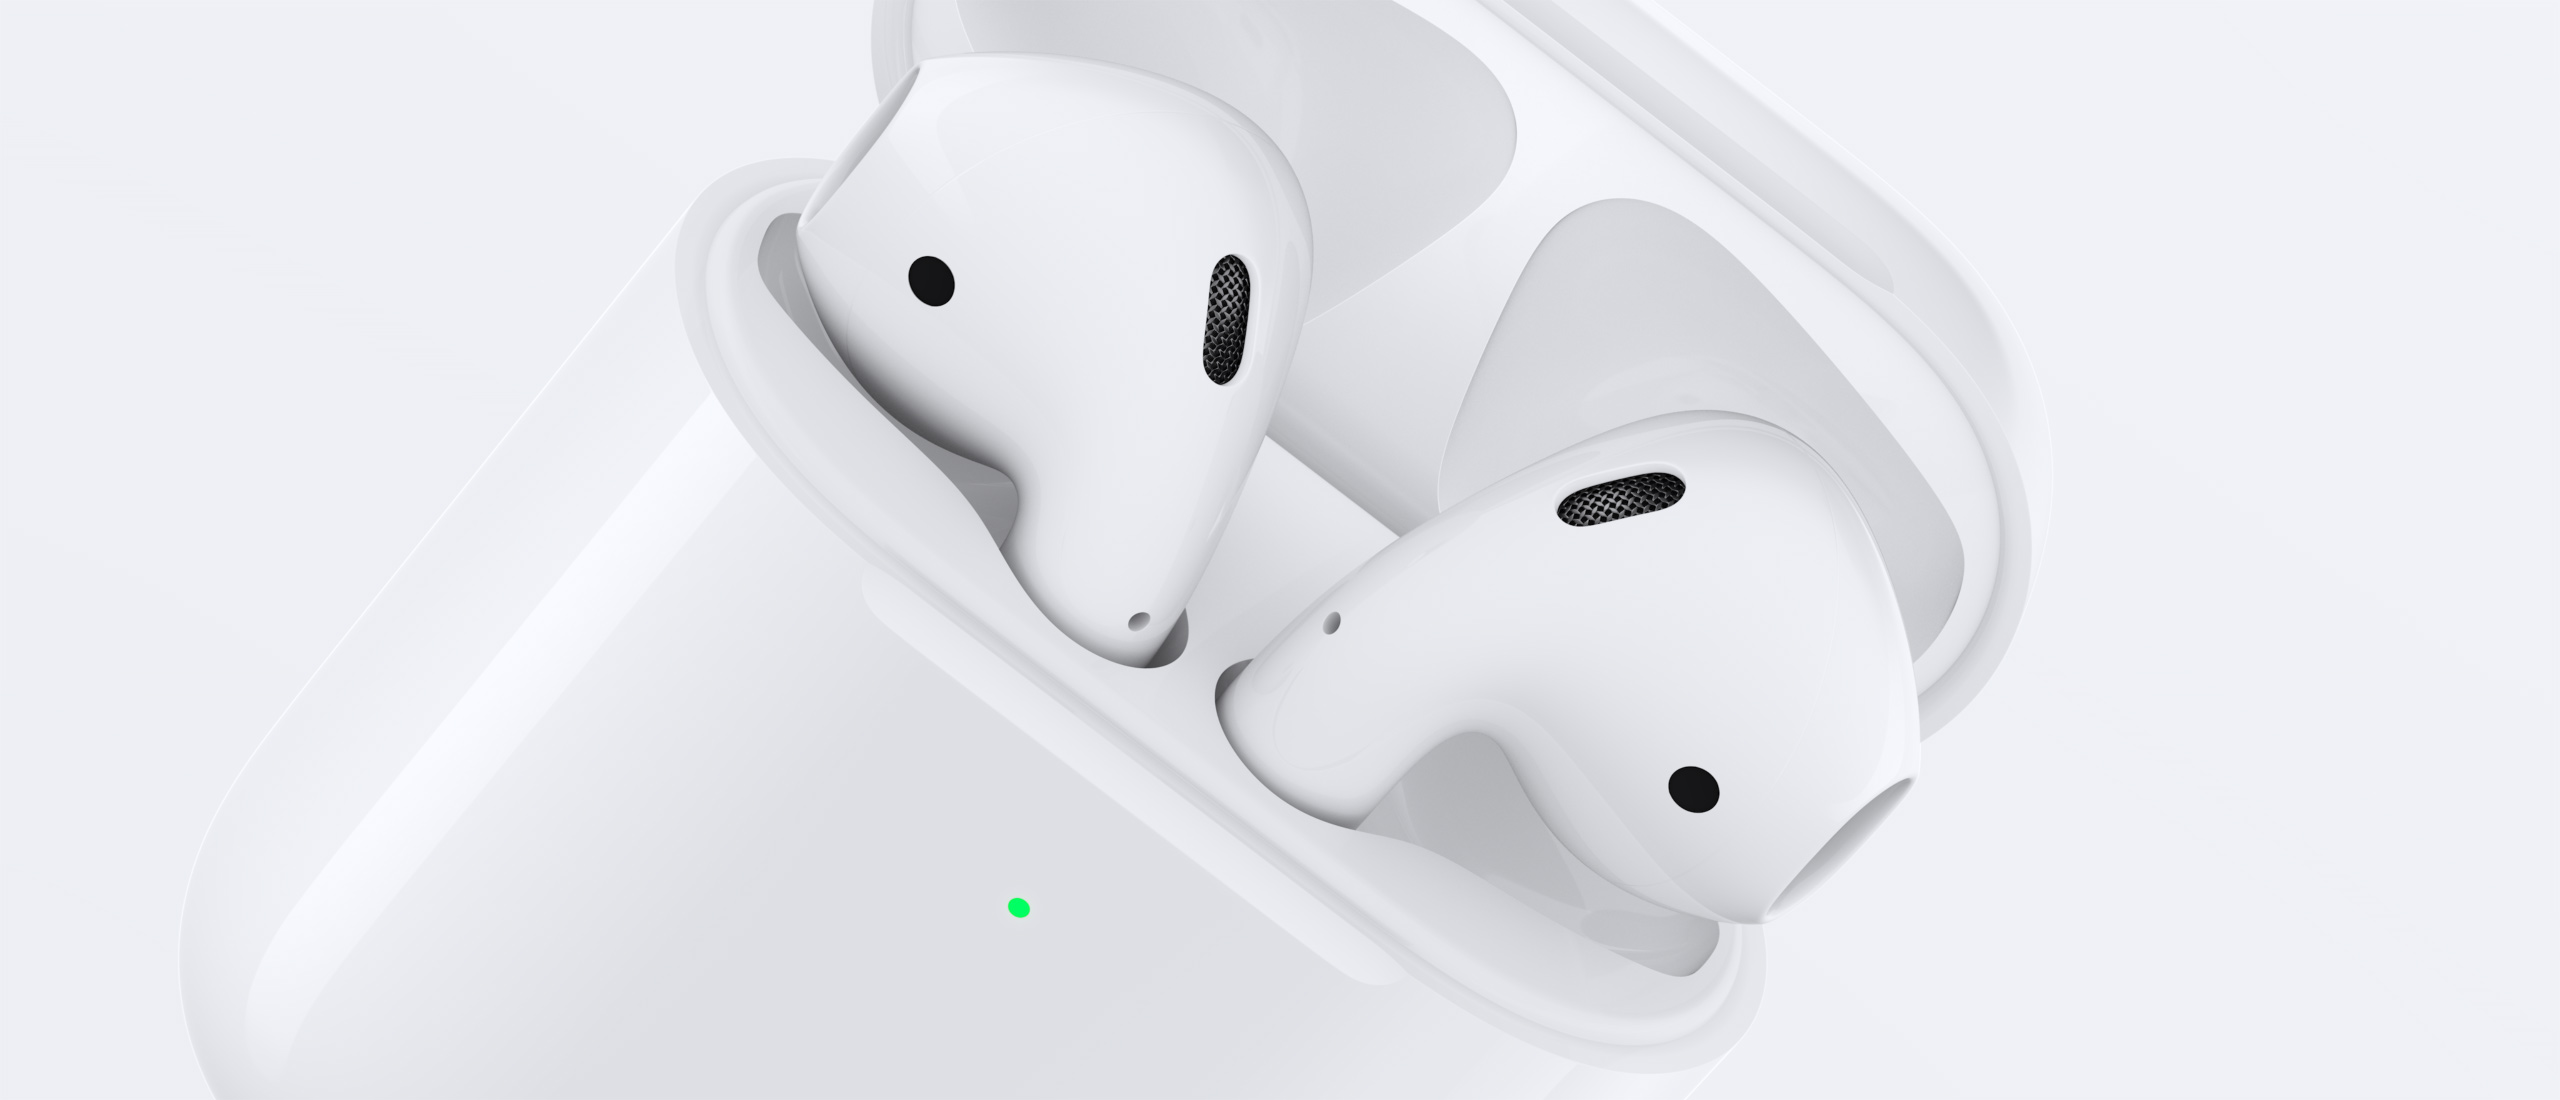 Monet precocious aspect Apple is sending replacement AirPods with unreleased firmware, making them  unusable